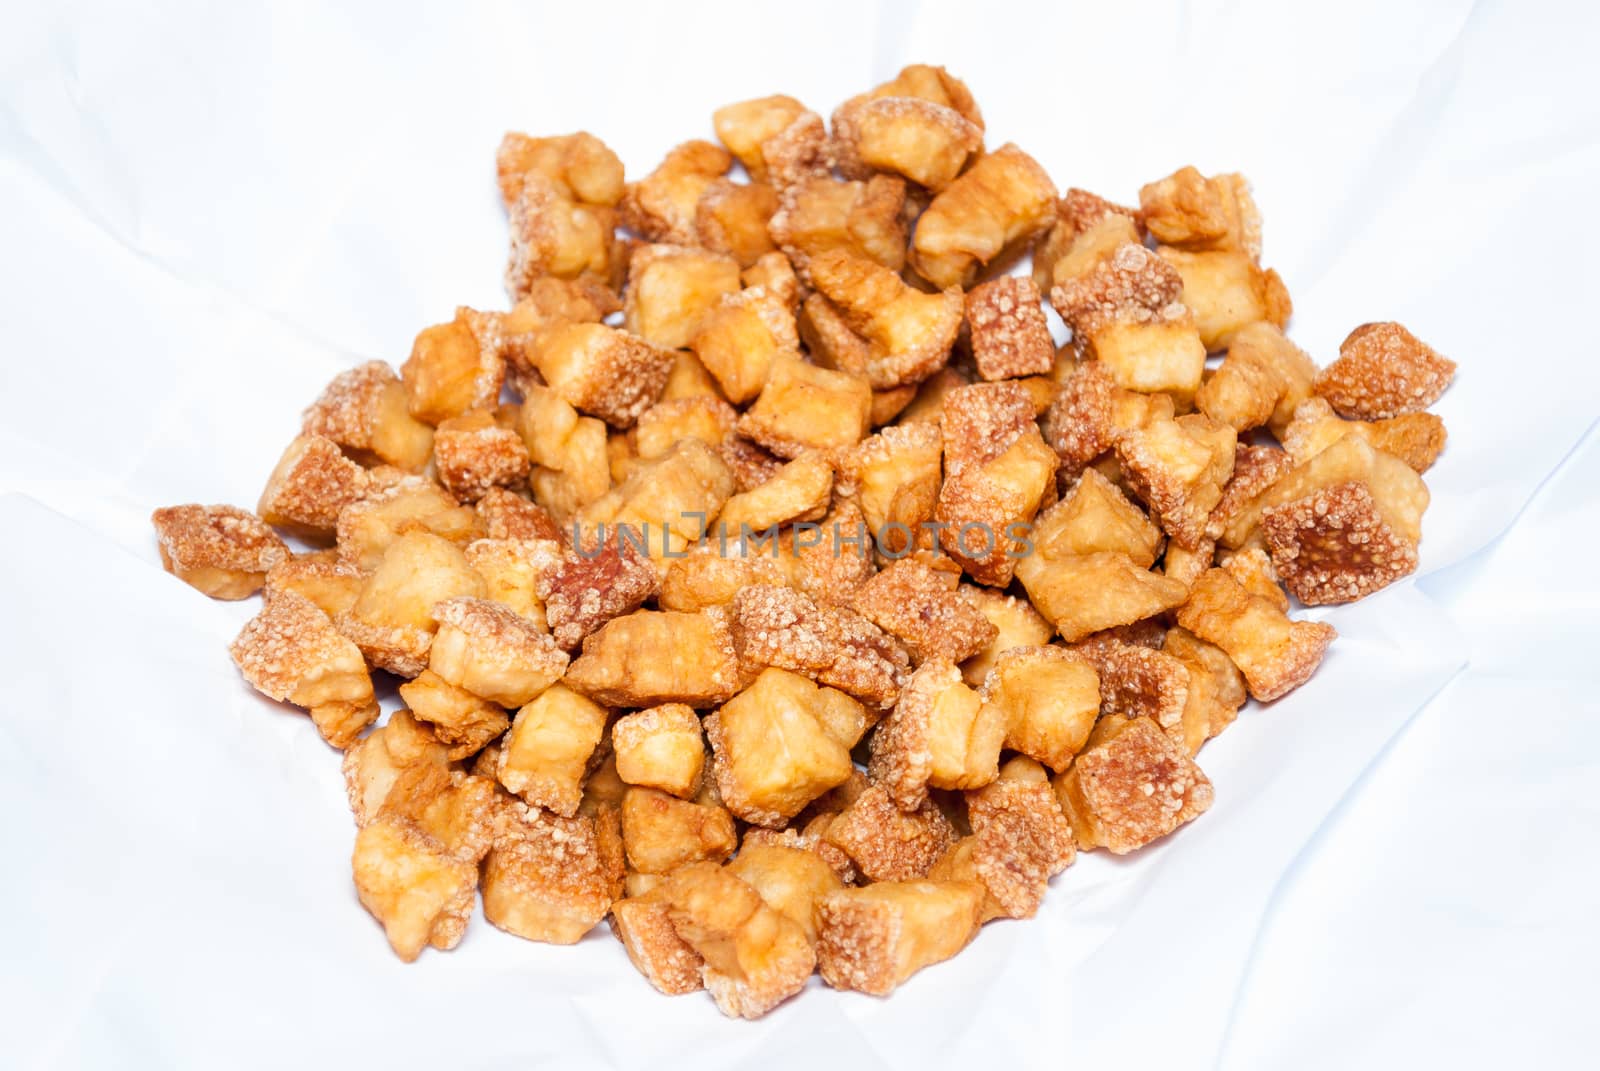 Deep Fried Pork Skin on White Paper [Soft Focus] by noneam